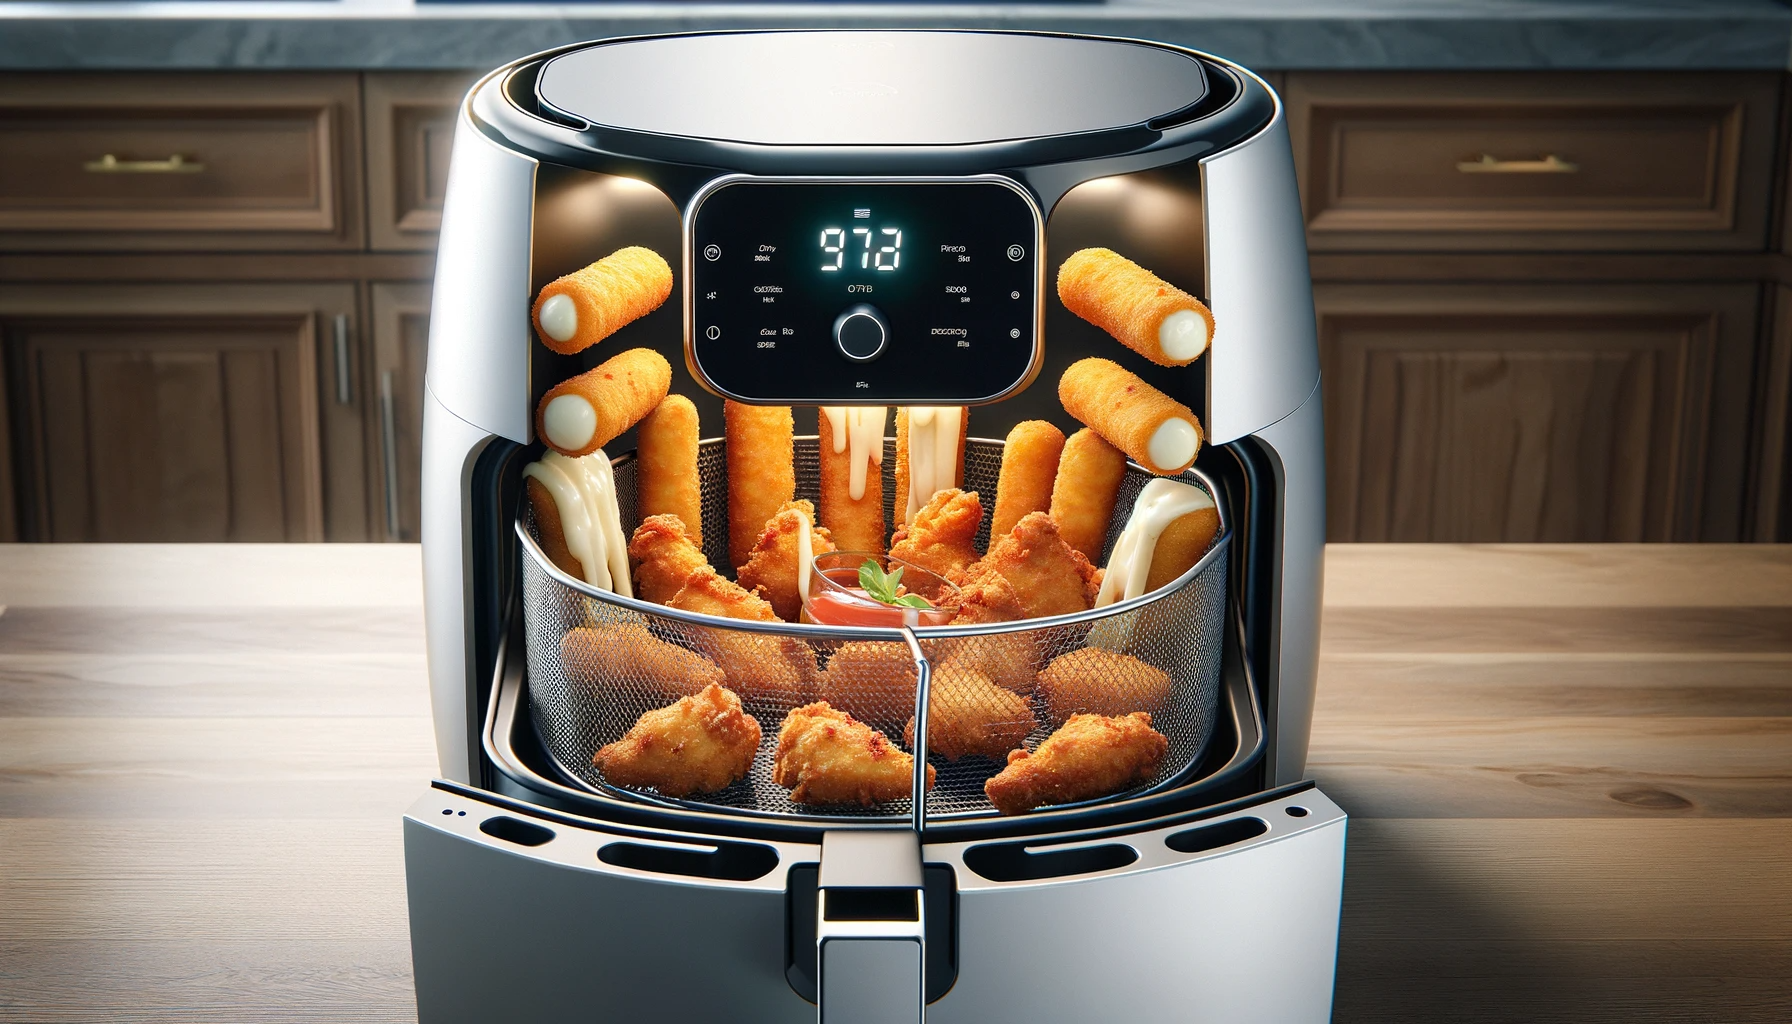 10 Air Fryer Recipes That Will Amaze Your Guests